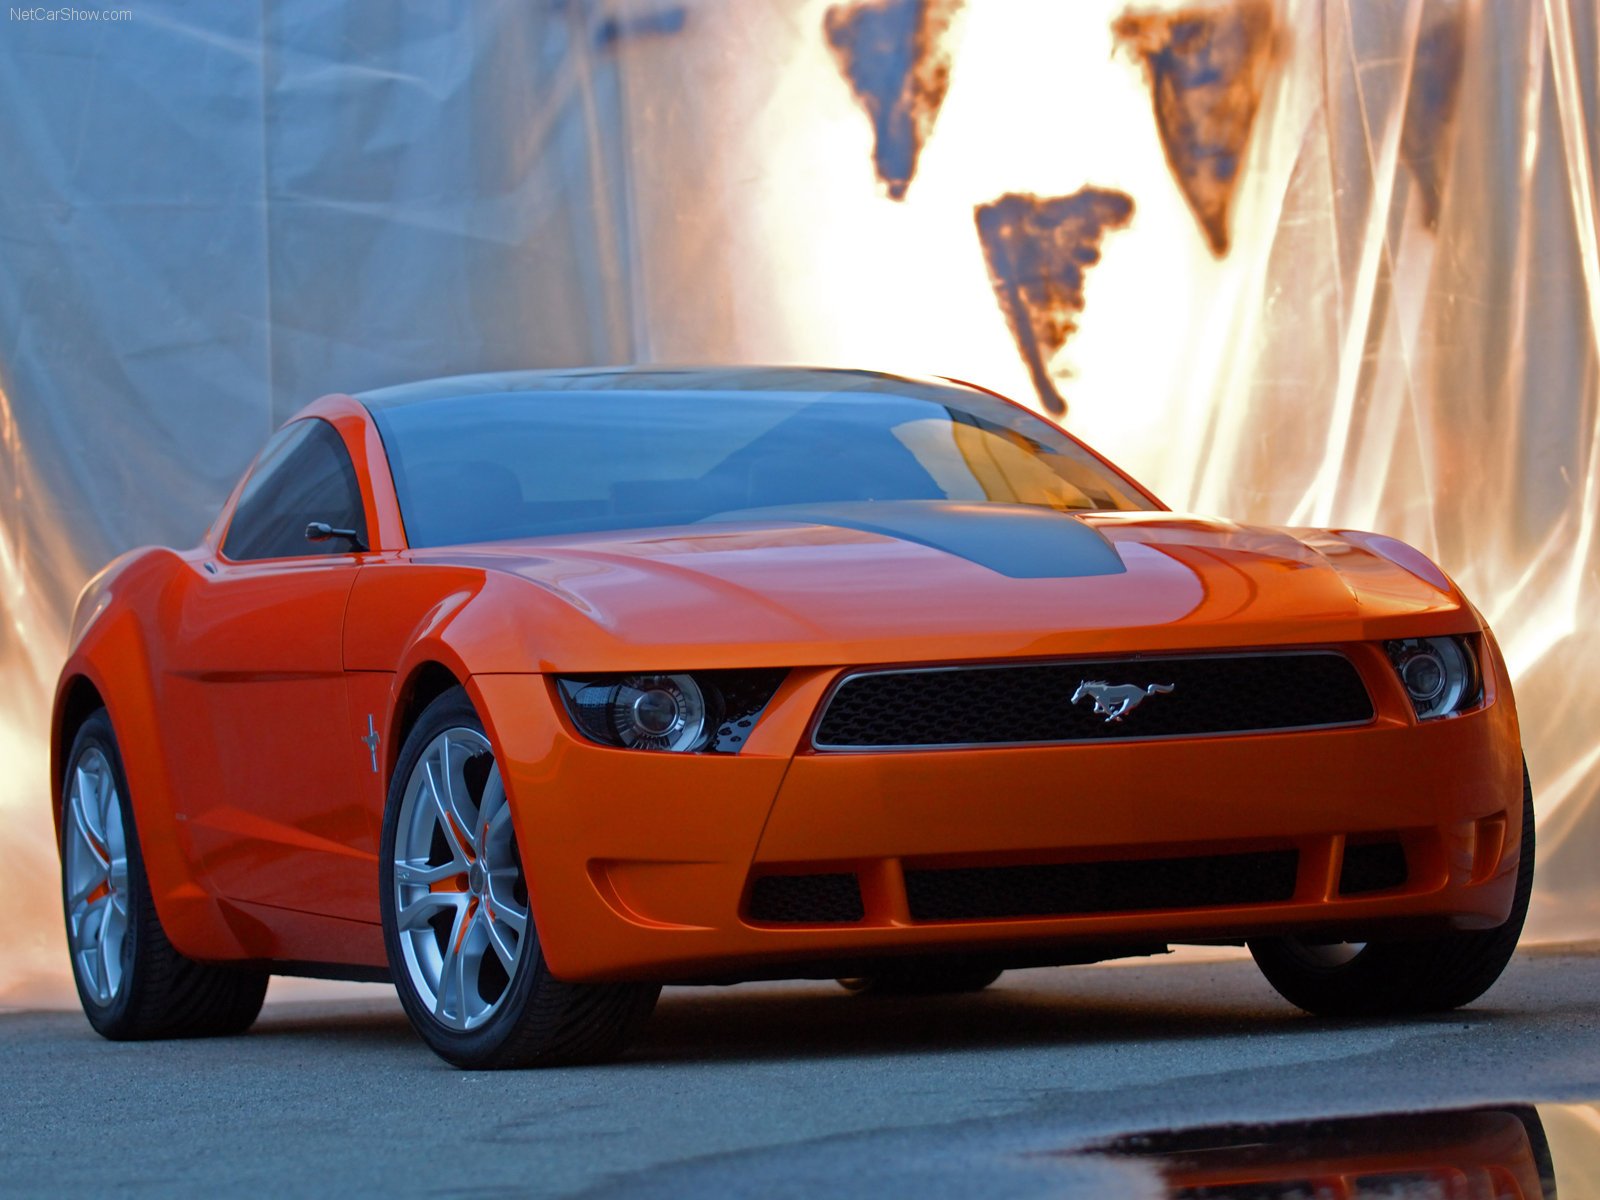 Download HQ Orange Mustang front Ford wallpaper / 1600x1200